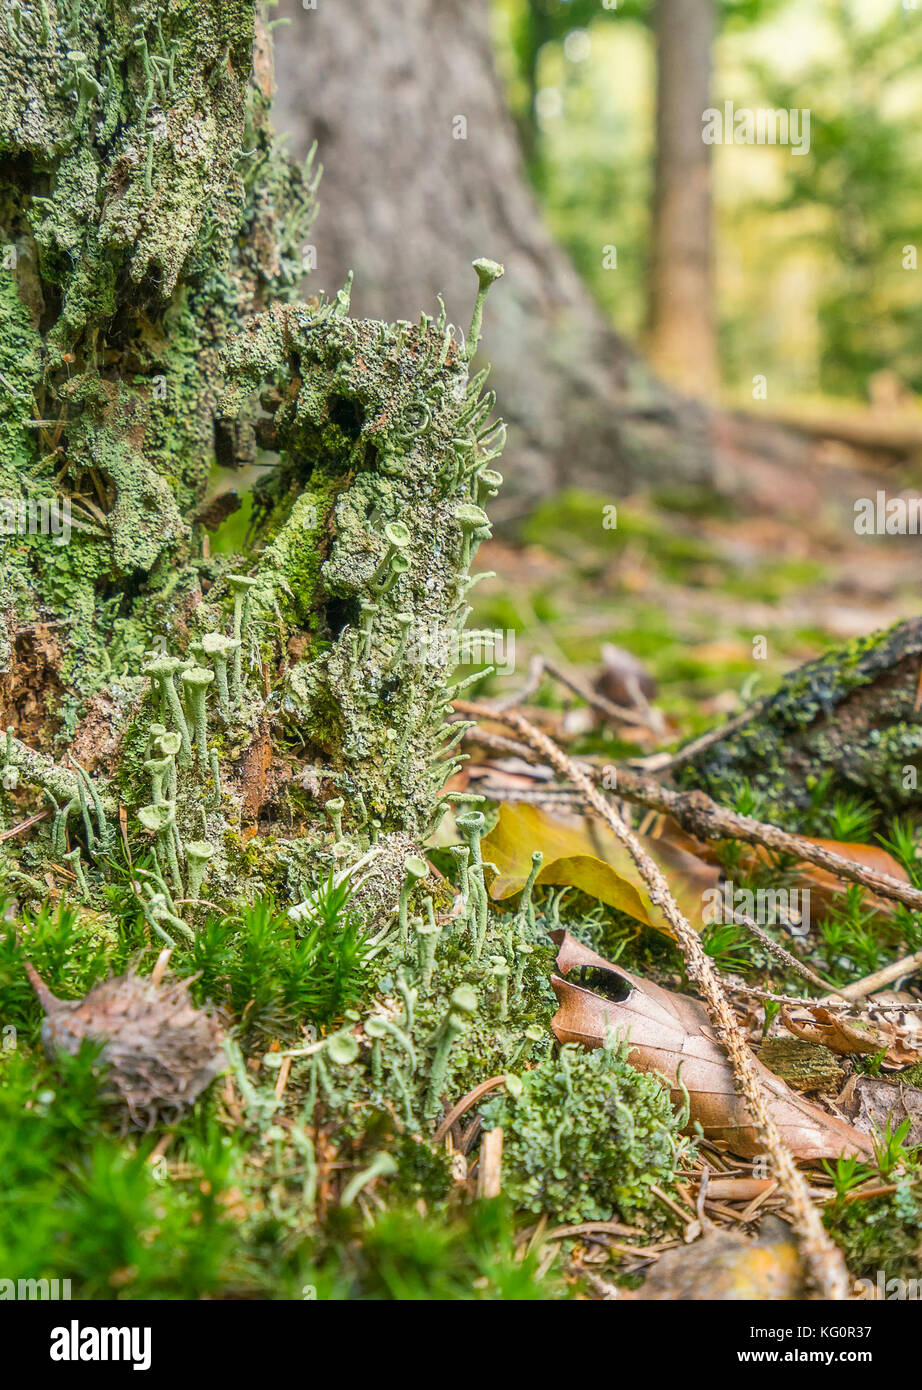 closeup shot of a dense ground cover vegetation on a tree trunk with moss and lichen in forest ambiance Stock Photo